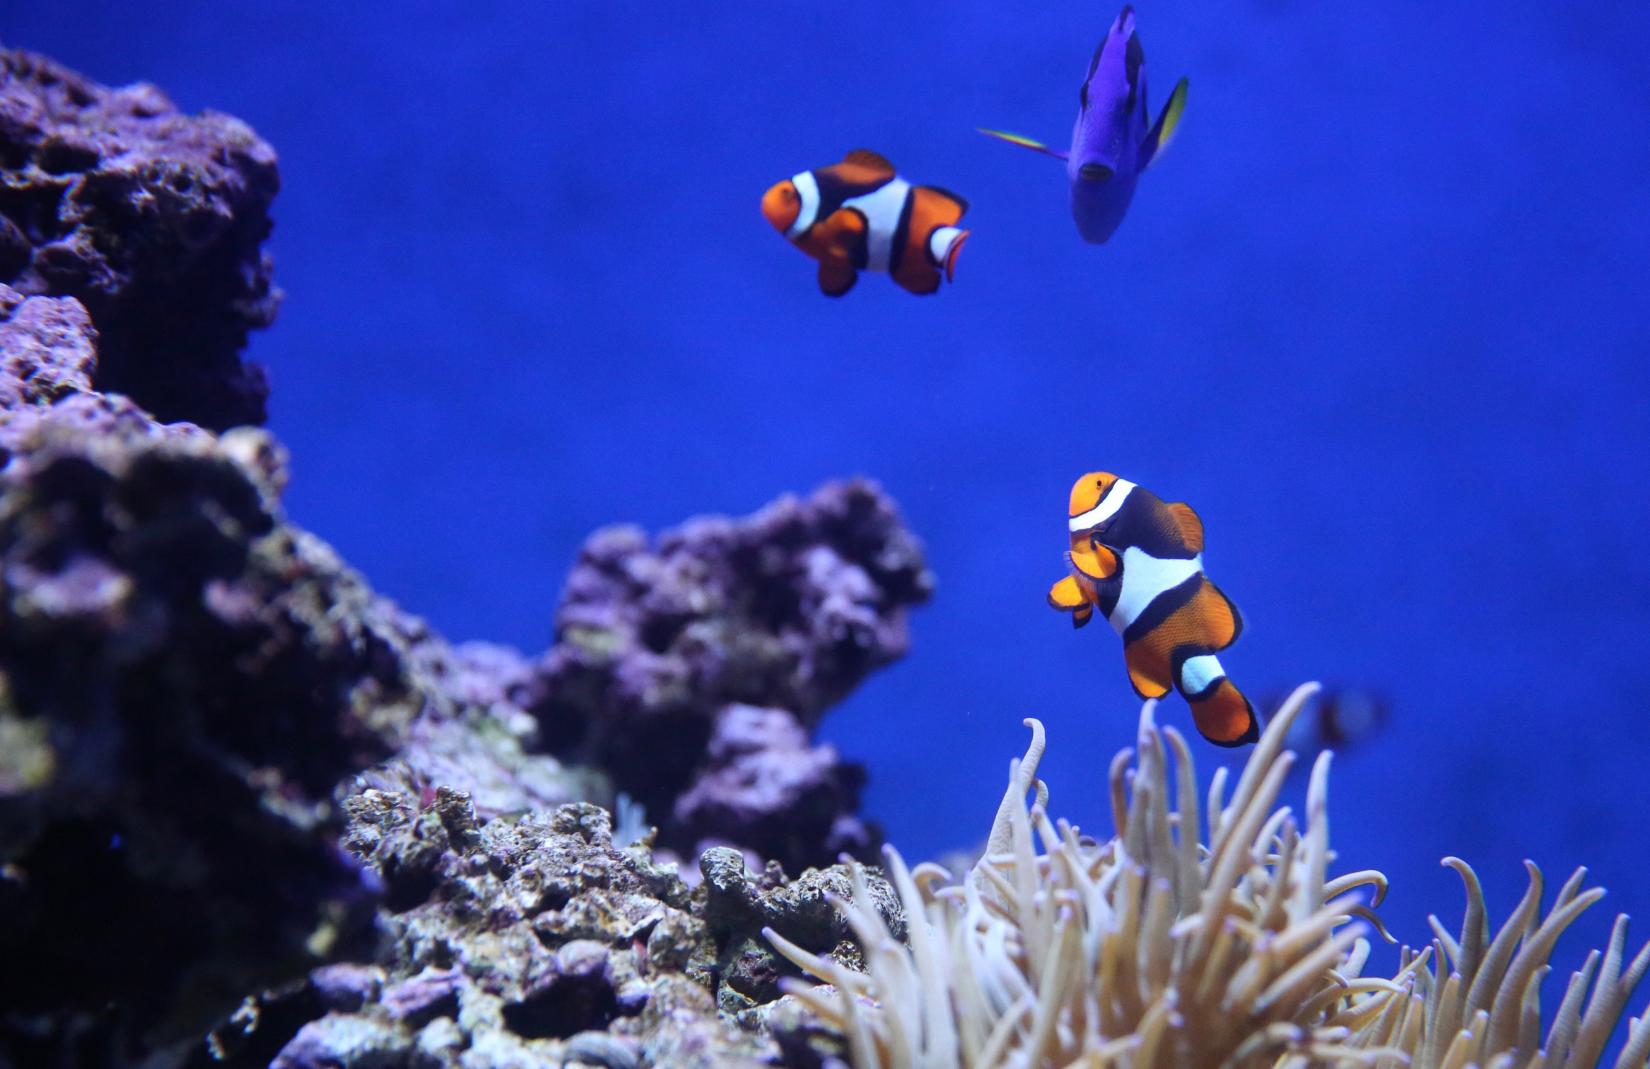 Photo of two clownfish swimming above reefs in deep blue waters